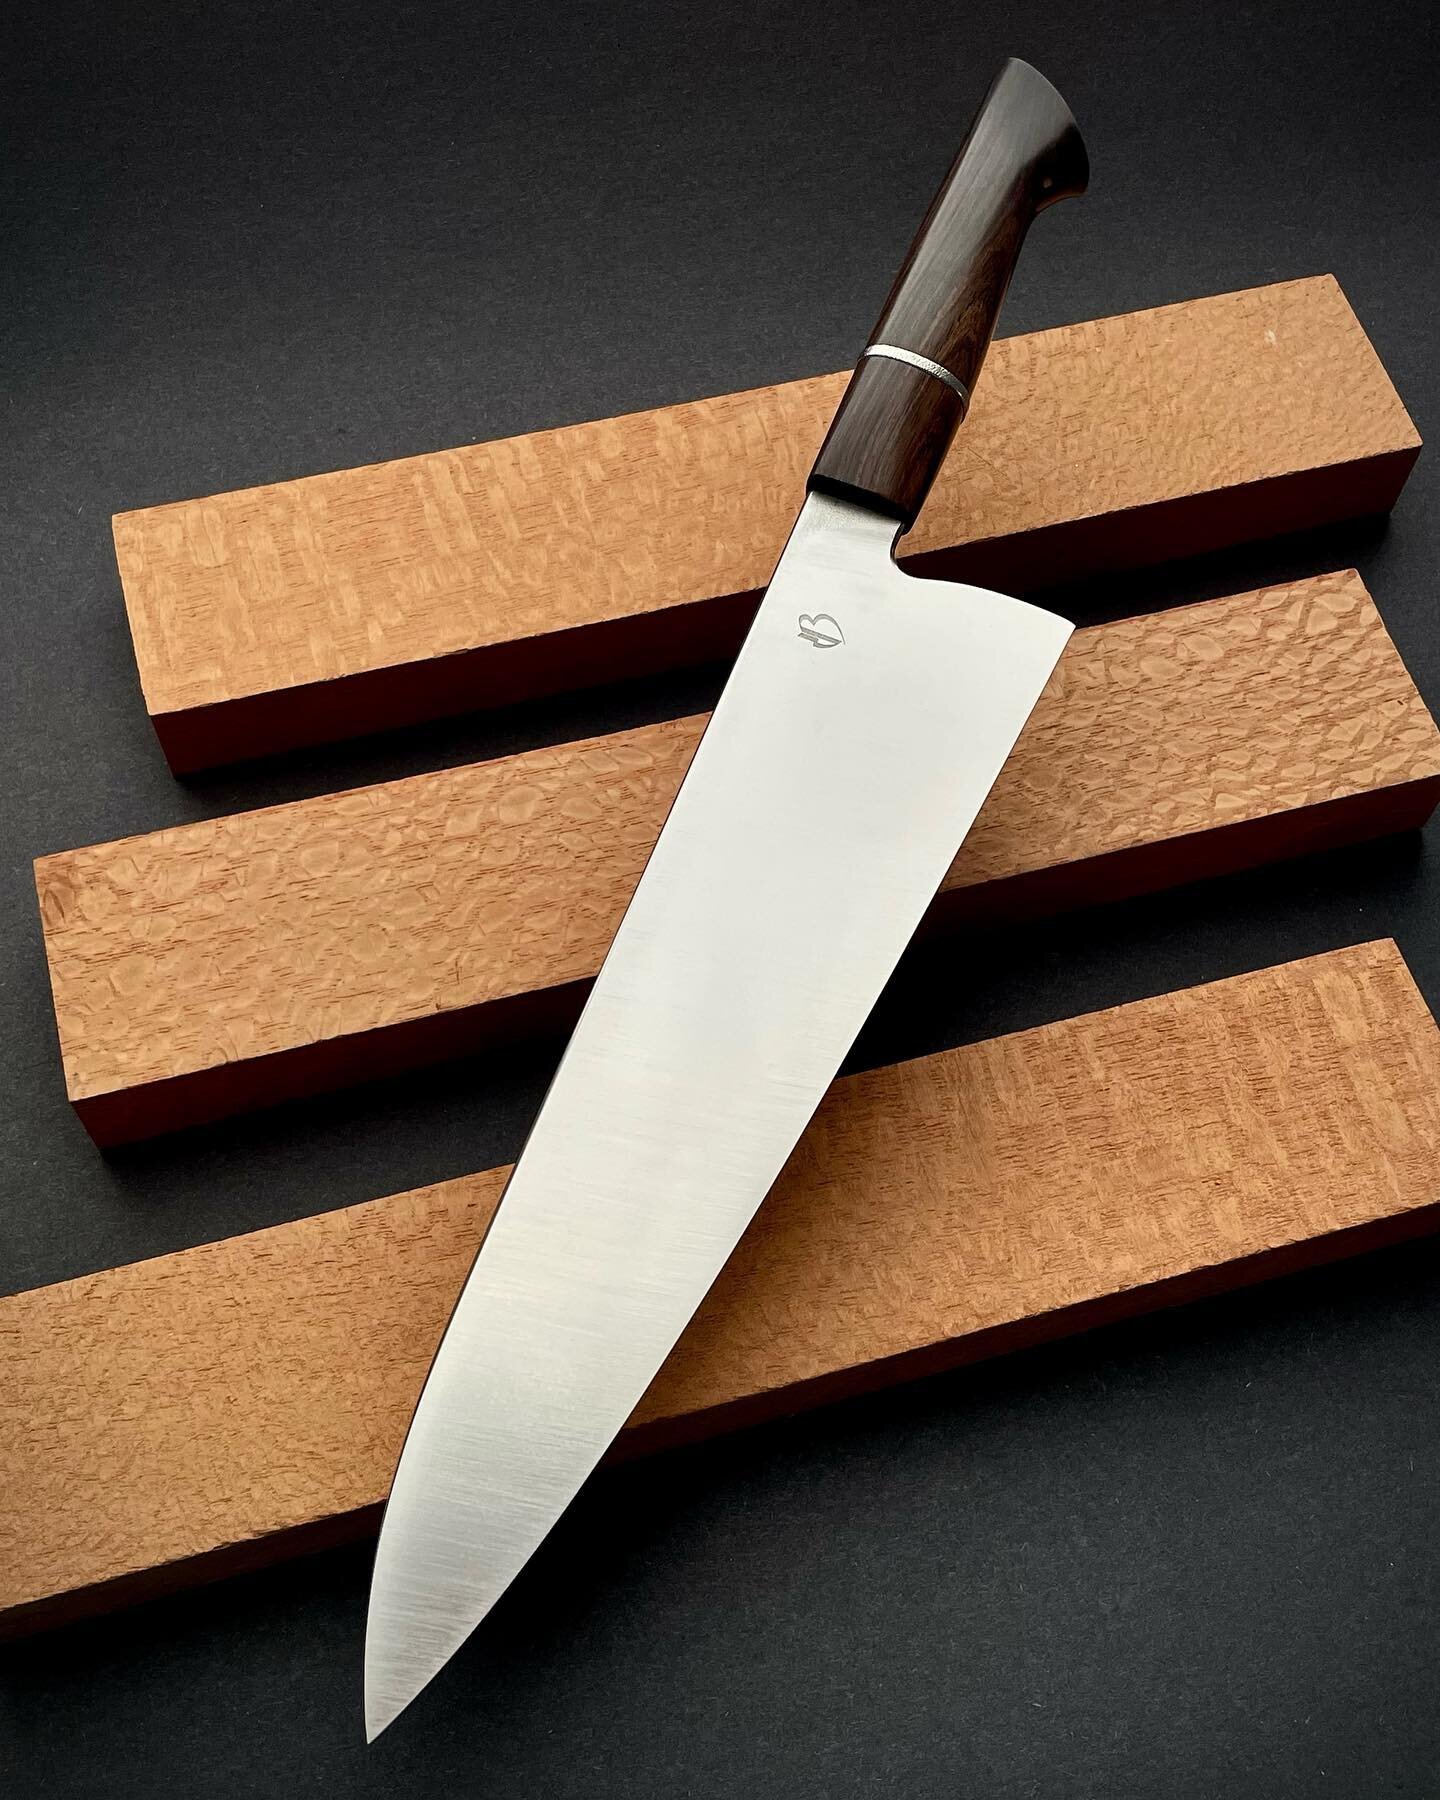 A large 255mm gyuto in 3V steel, 63mm tall at the heel, with a forward balance just in-front of the makers mark. Thin convex grind focused on ease of cutting. The handle is African Blackwood with a textured titanium spacer. (Spoken for)
&bull;
#perfo